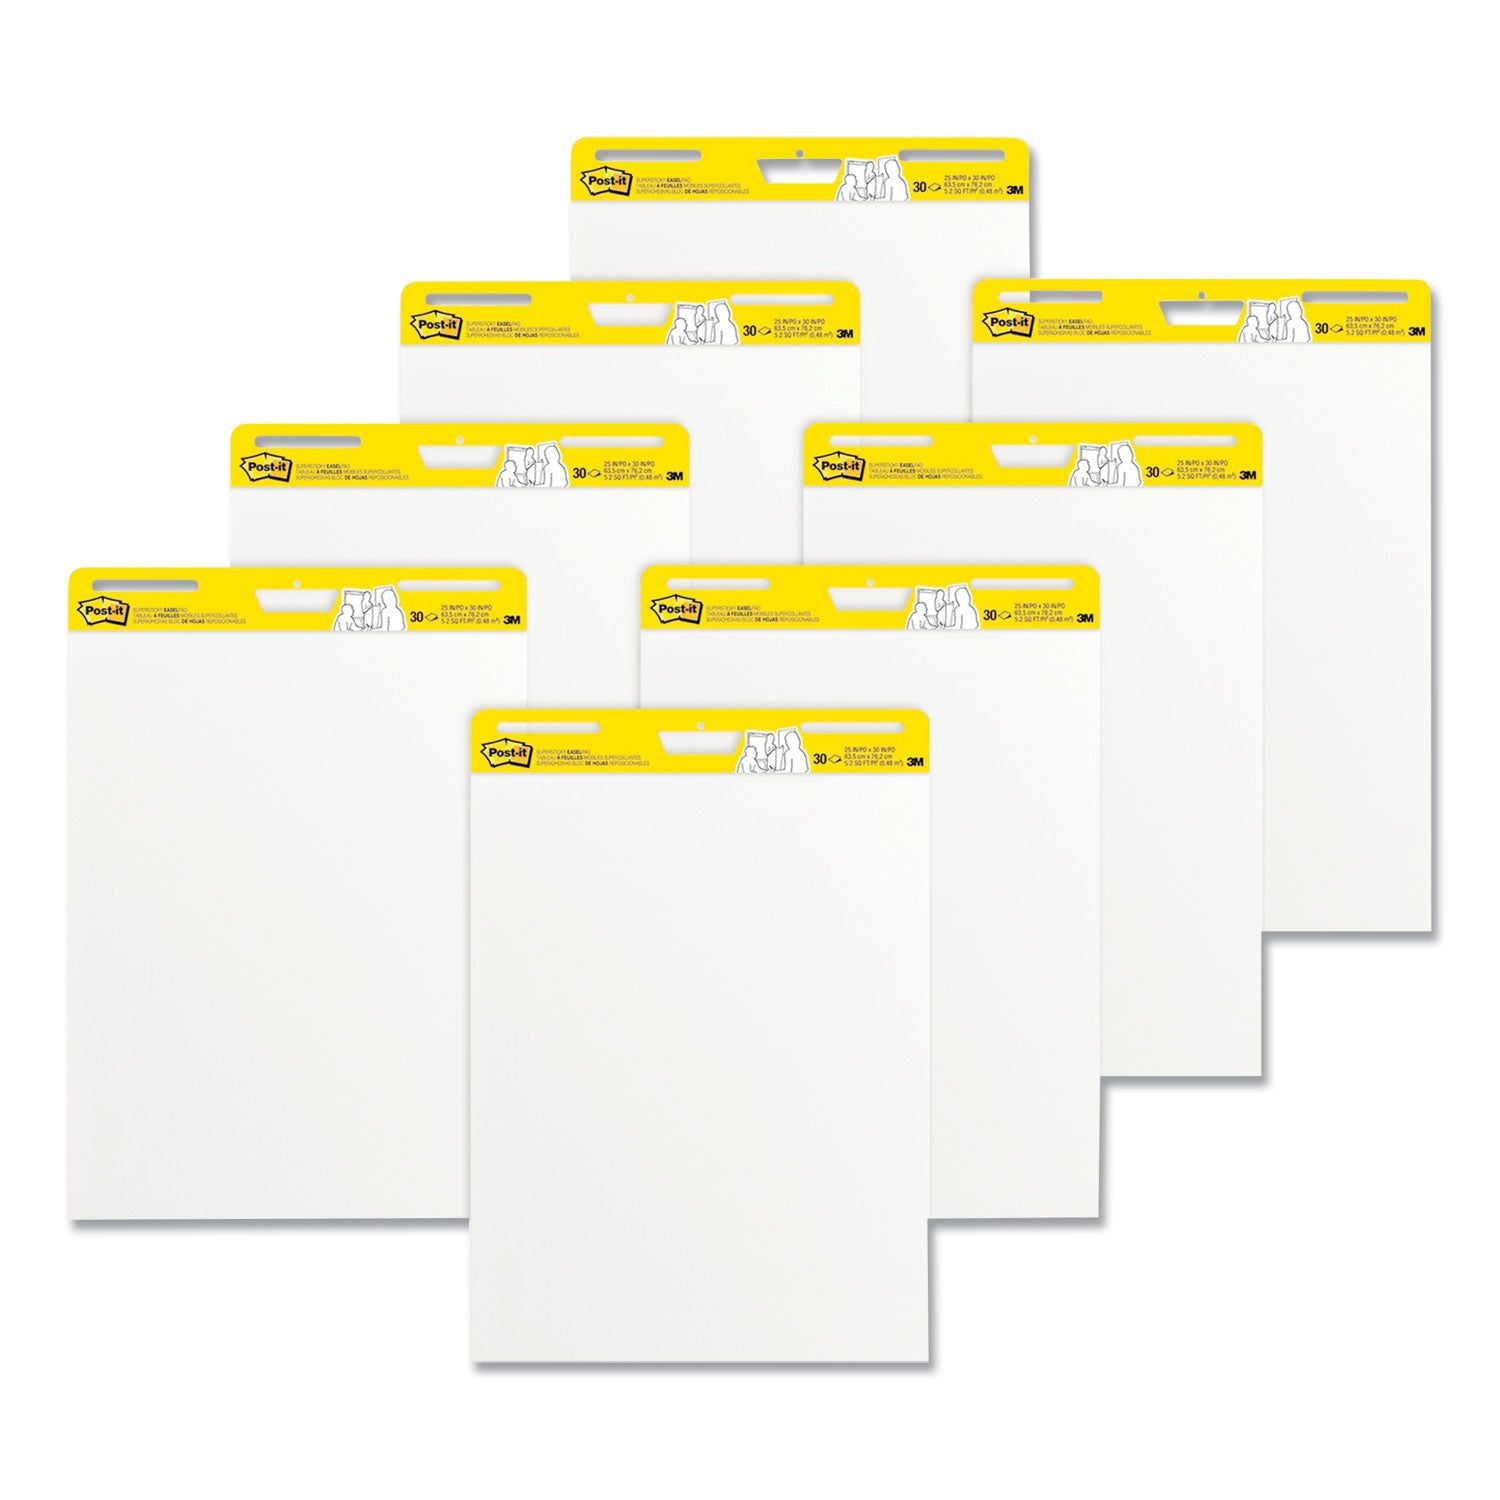 vertical-orientation-self-stick-easel-pads-unruled-25-x-30-white-30-sheets-8-pack_mmm559vad8pk - 7